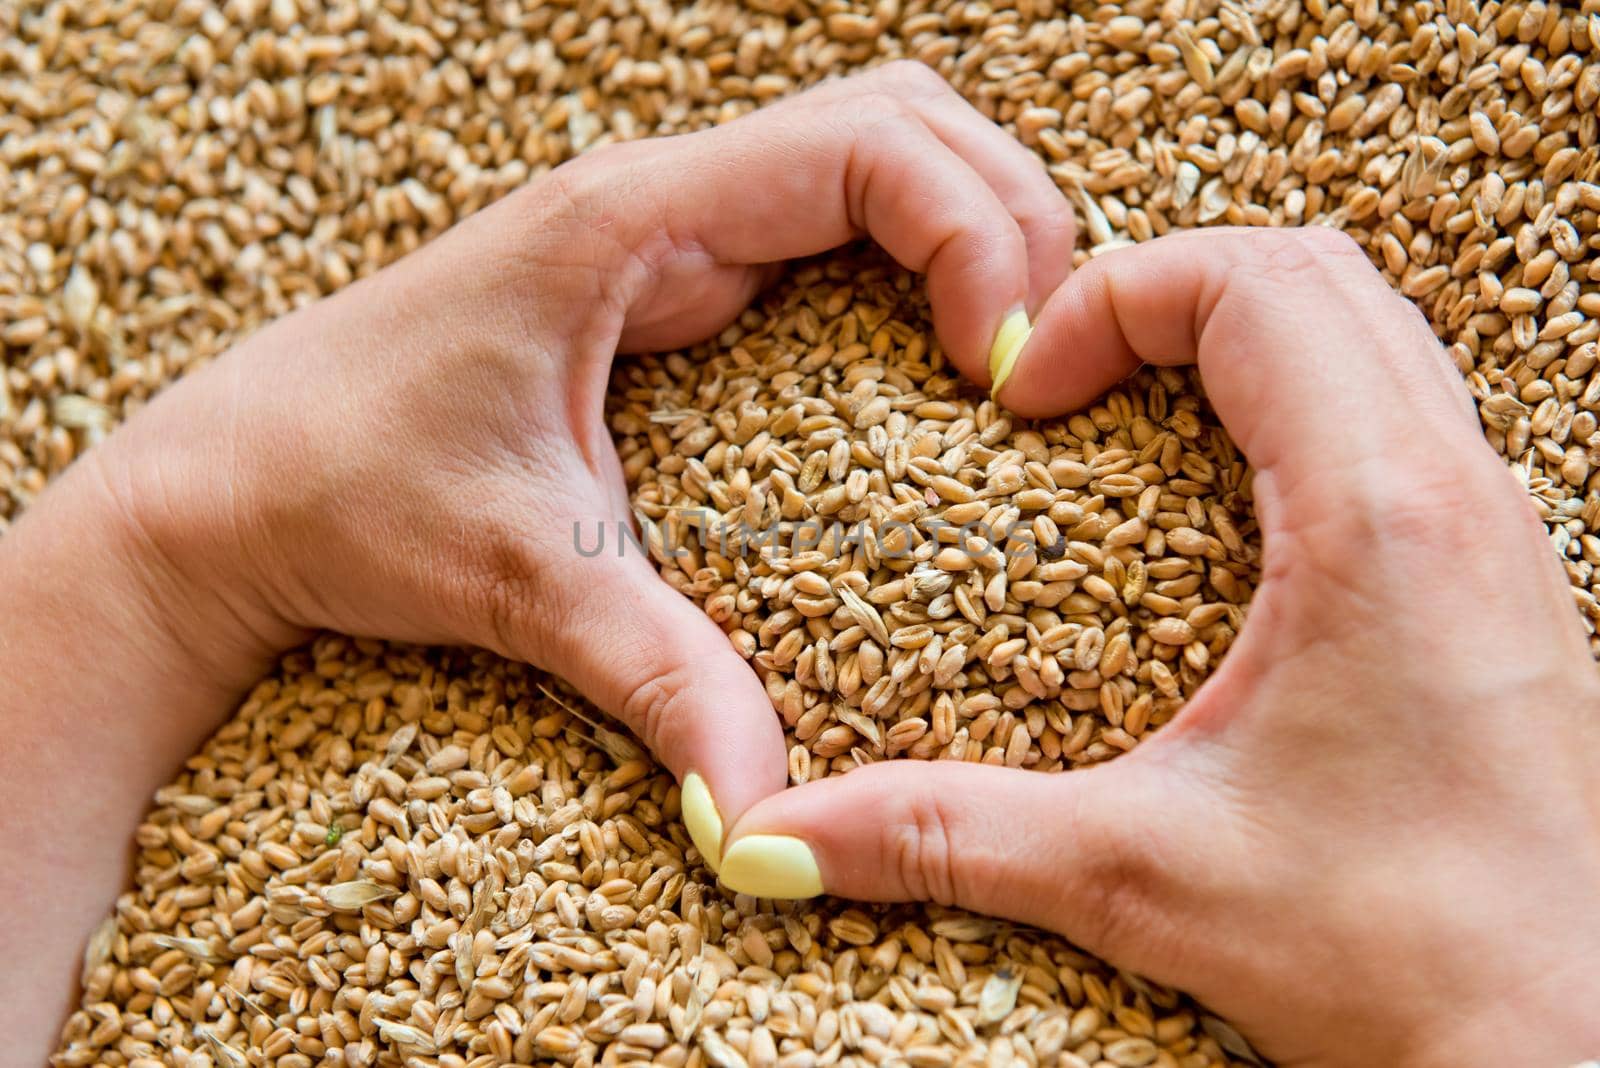 Women's hands in the shape of a heart on a background of wheat seeds. by leonik